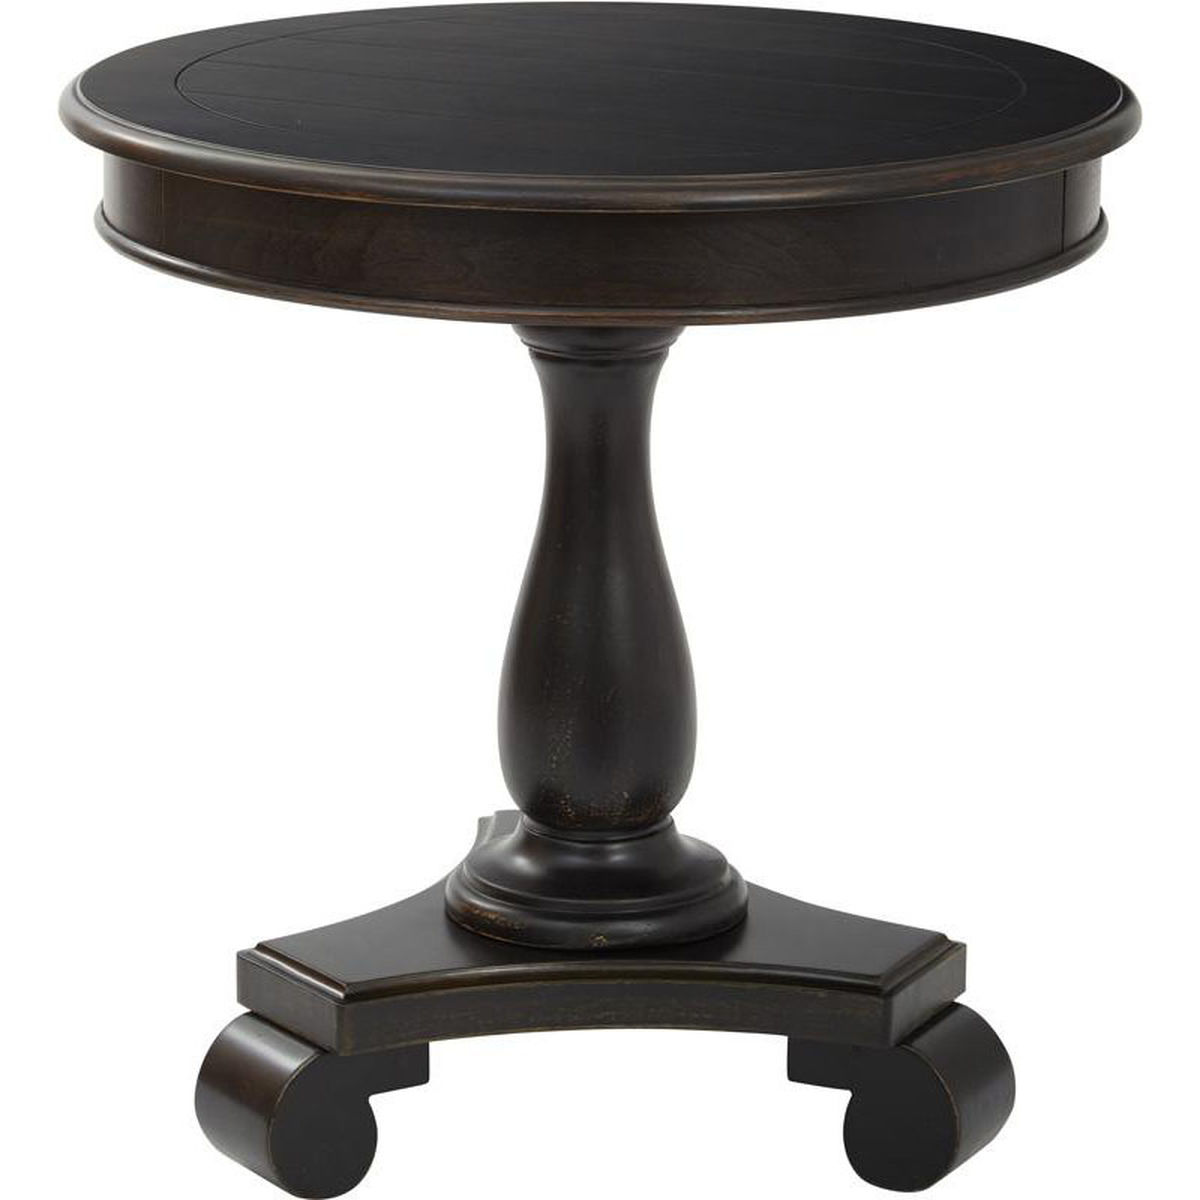 avalon round accent table avlat bizchair office star products vintage our inspired bassett hand painted wine outdoor grill work chairs from pier one imports koncept lighting legs